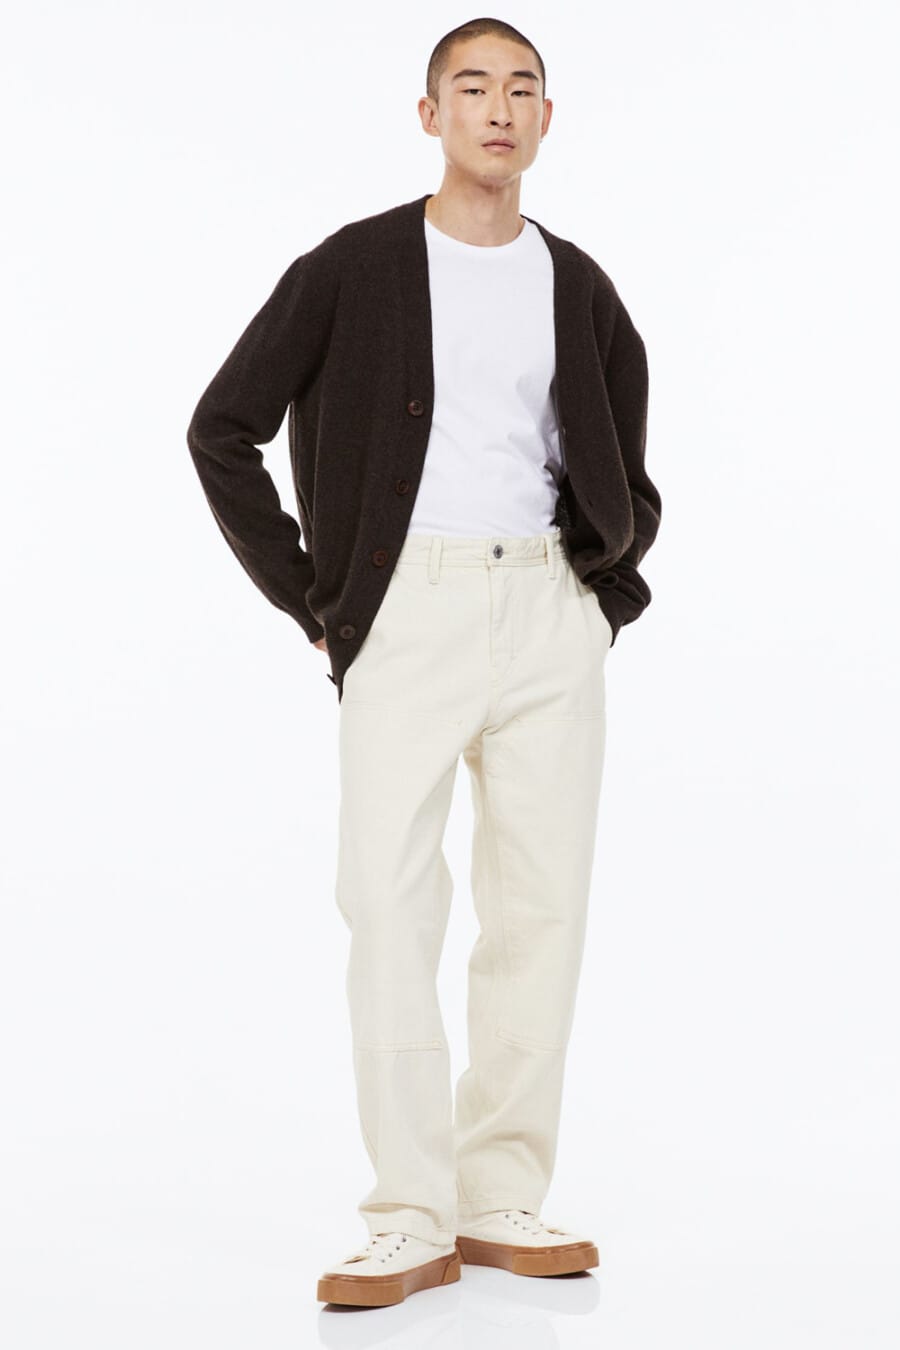 Men's baggy off-white jeans, white tucked in T-shirt, brown cardigan and off-white gum sole sneakers outfit